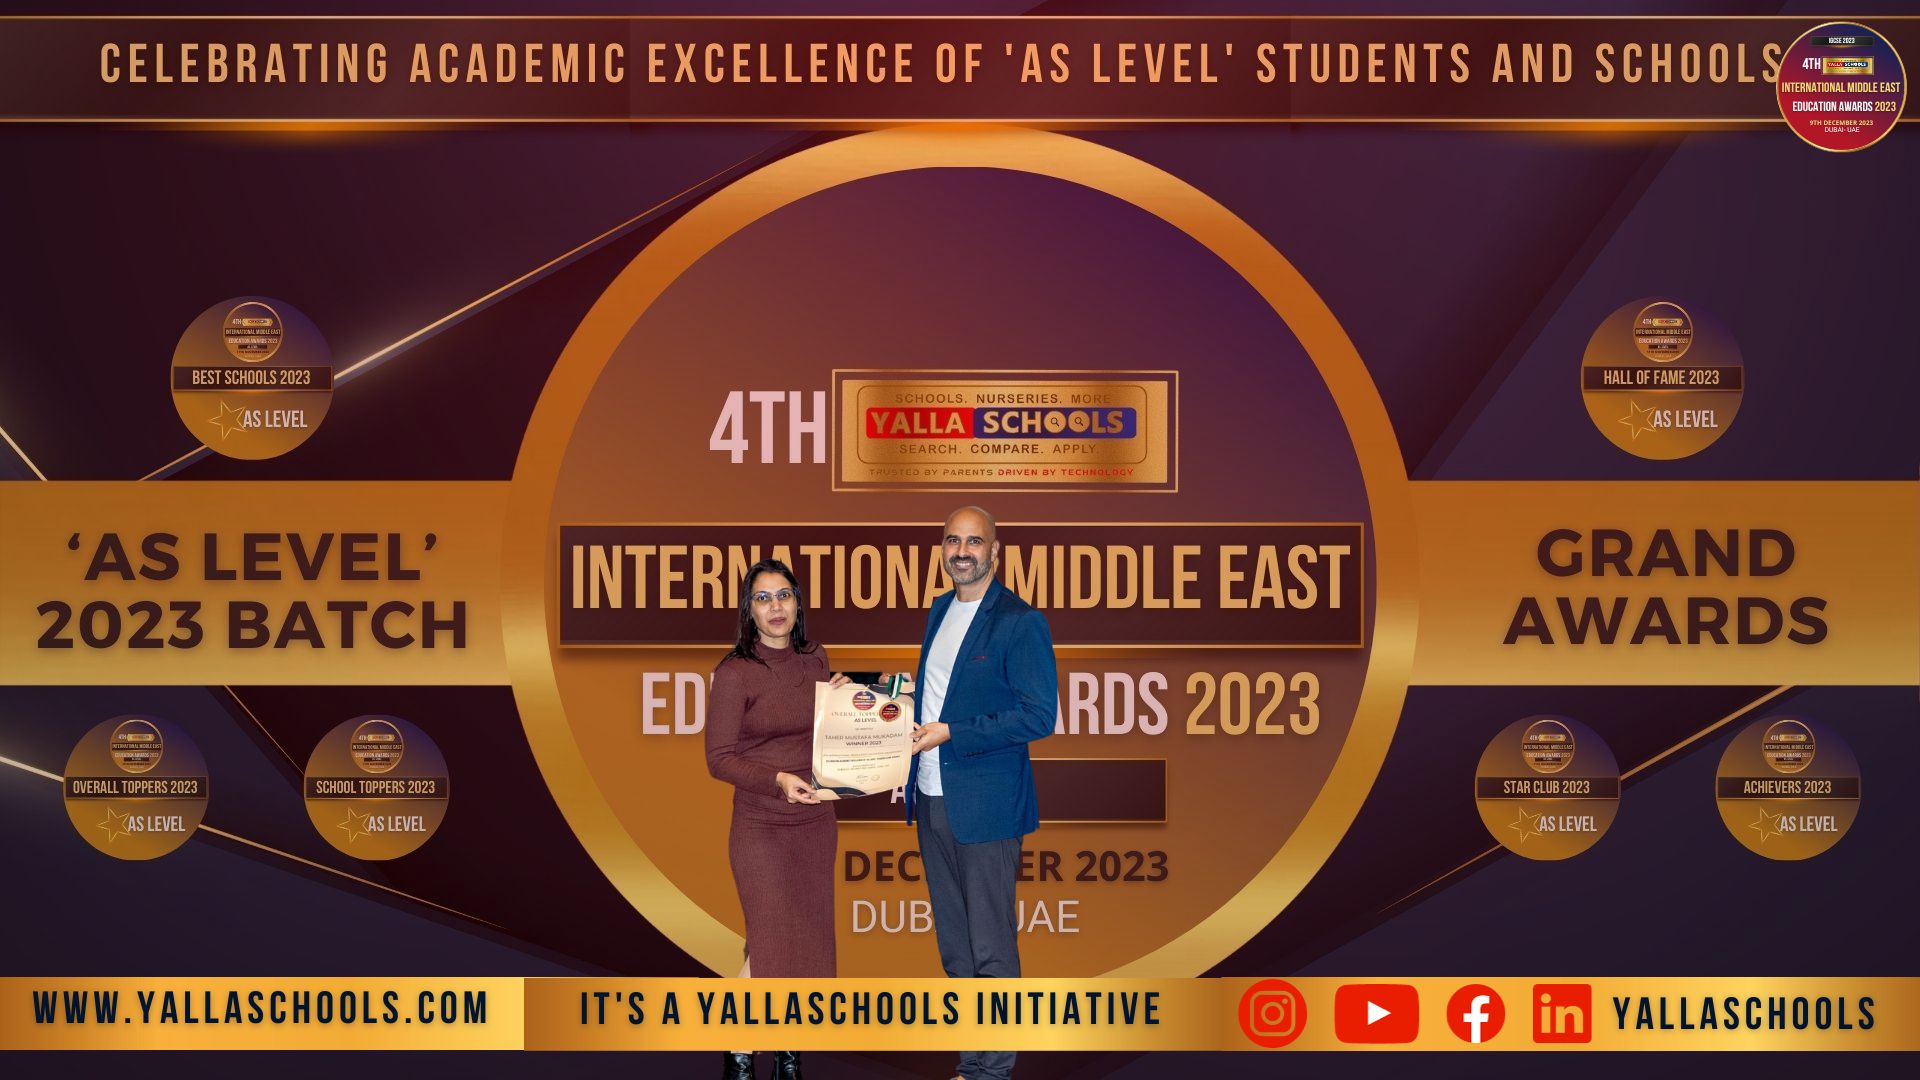 4th_International_Middle_East_Education_Grand_Awards_2023_(AS_LEVEL)_(1)